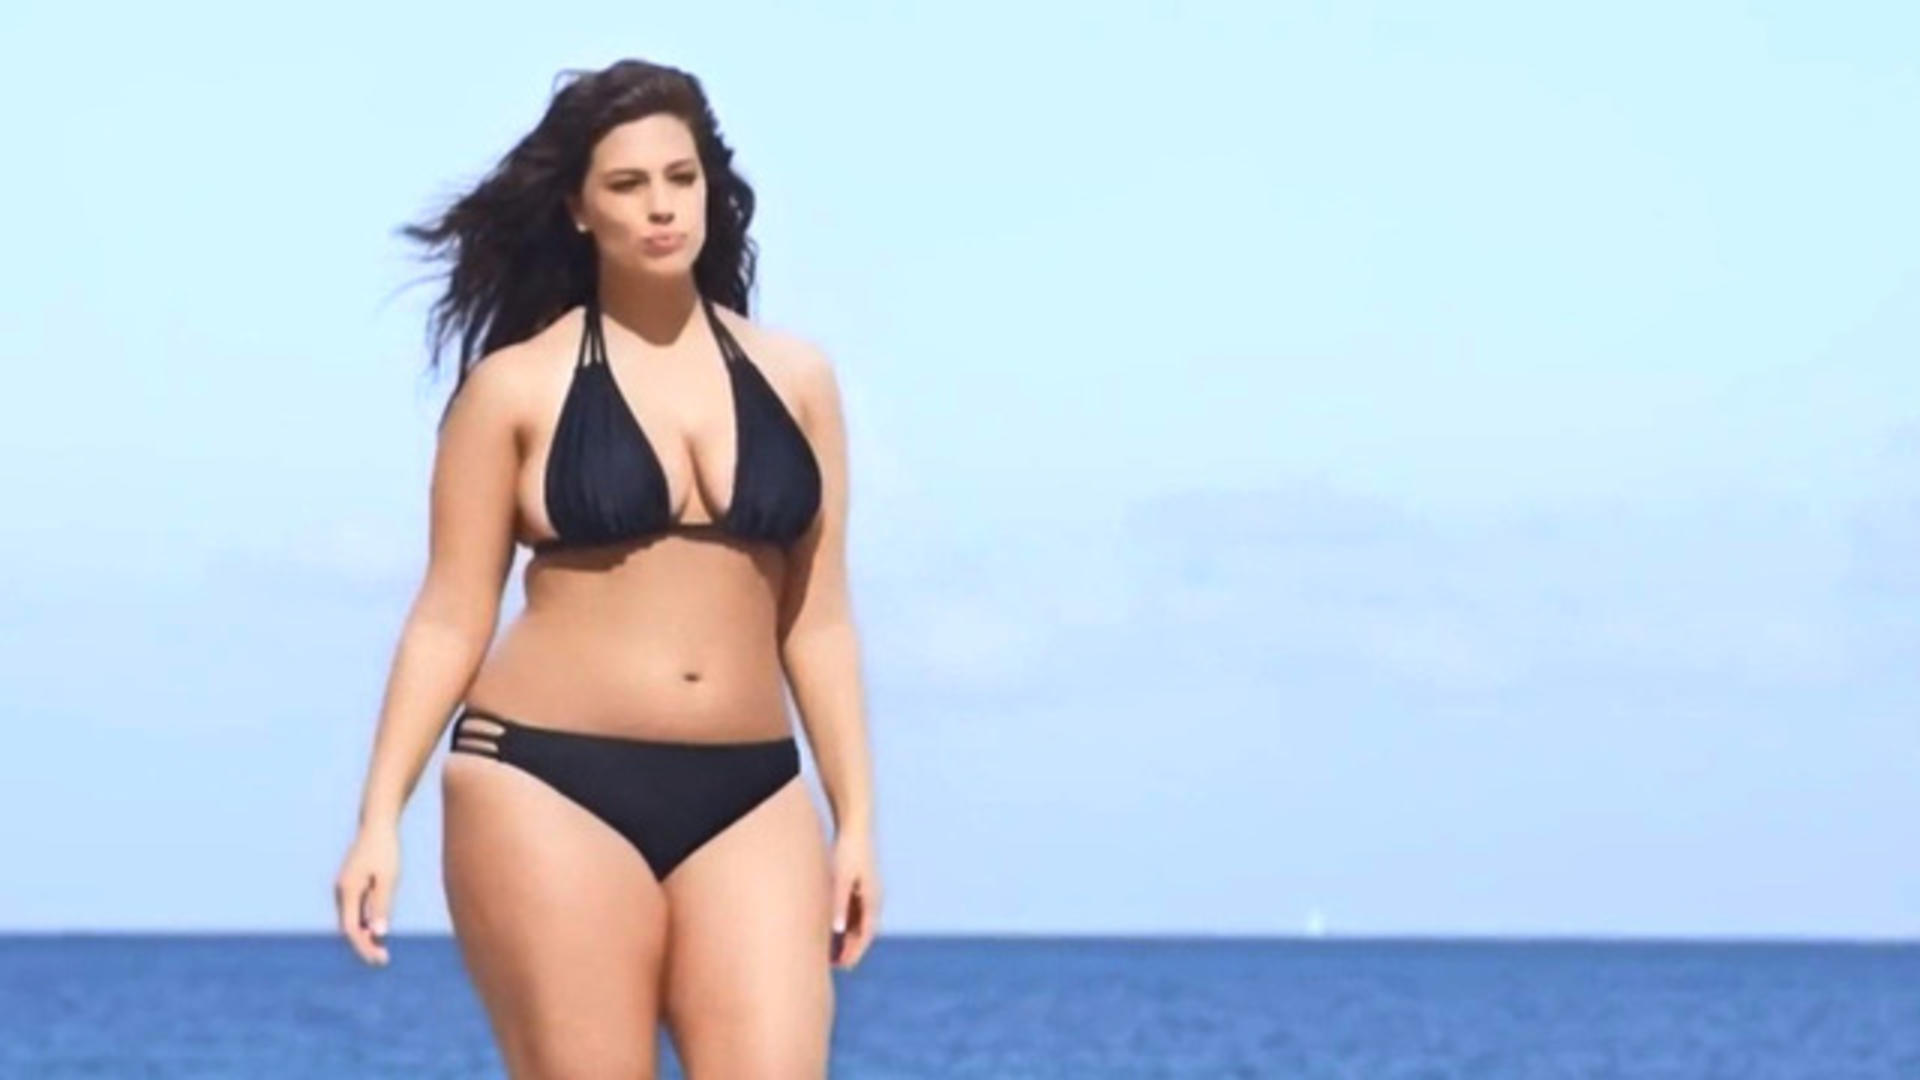 Sports Illustrated Swimsuit Edition Features Ad With Plus Sized